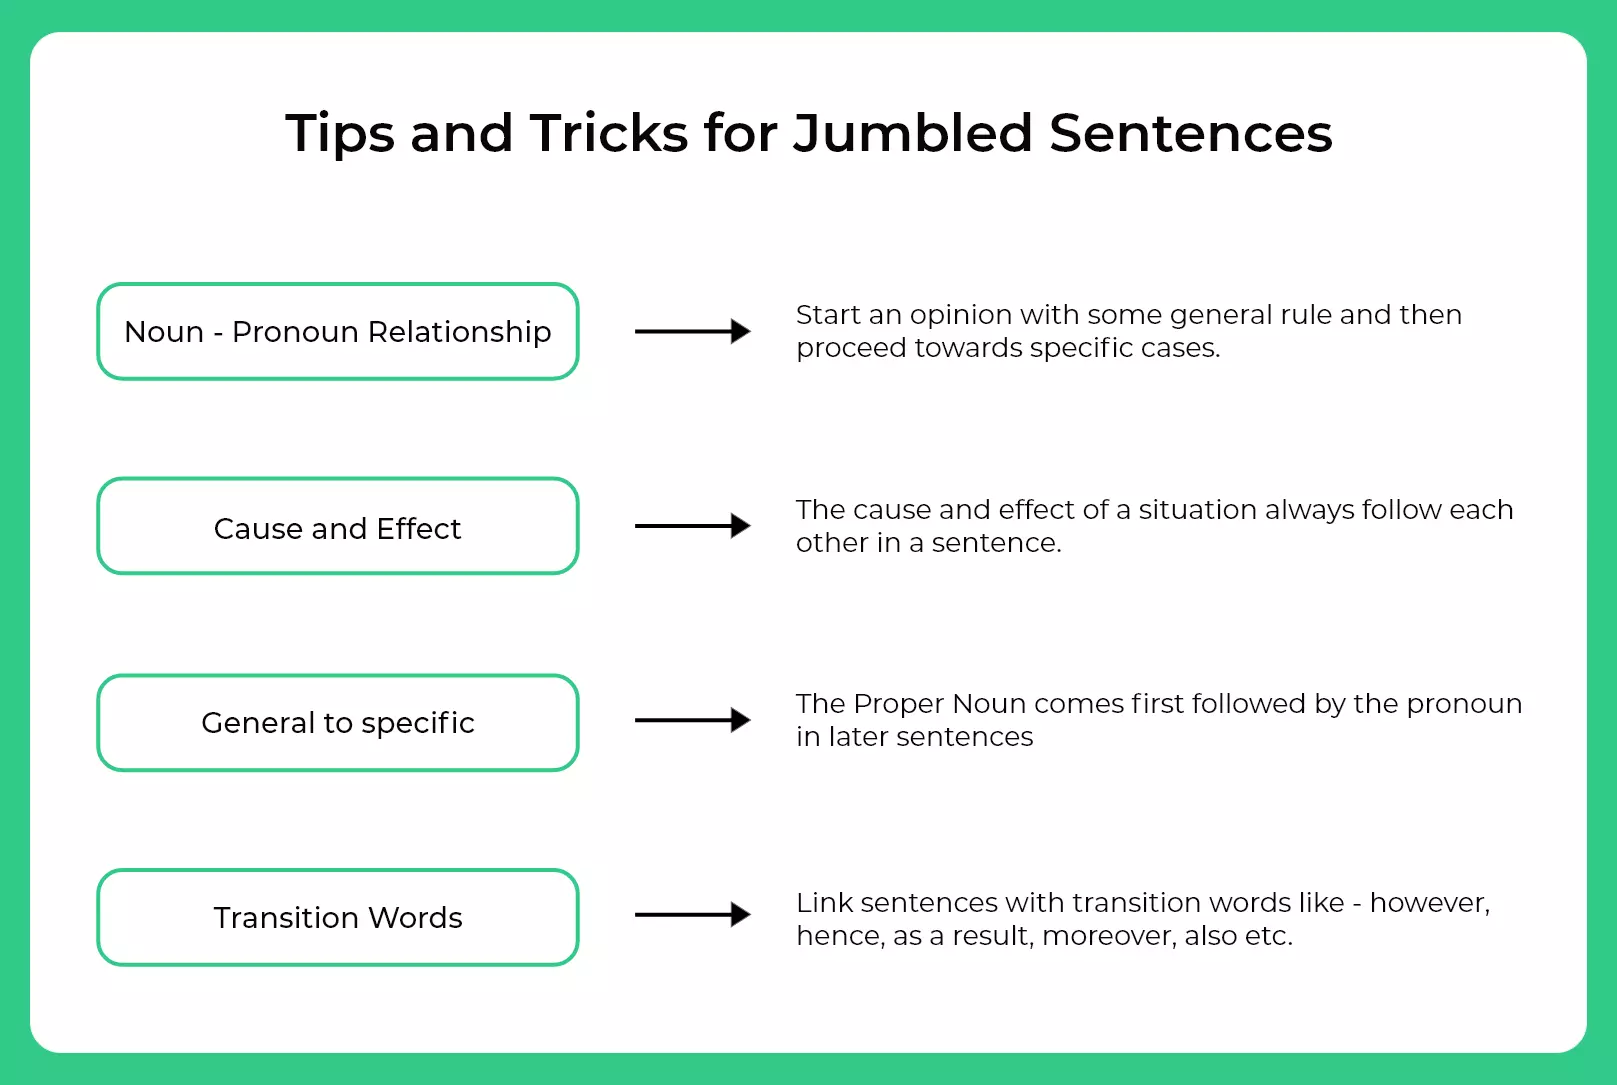 Tips and Tricks for Jumbled Sentences